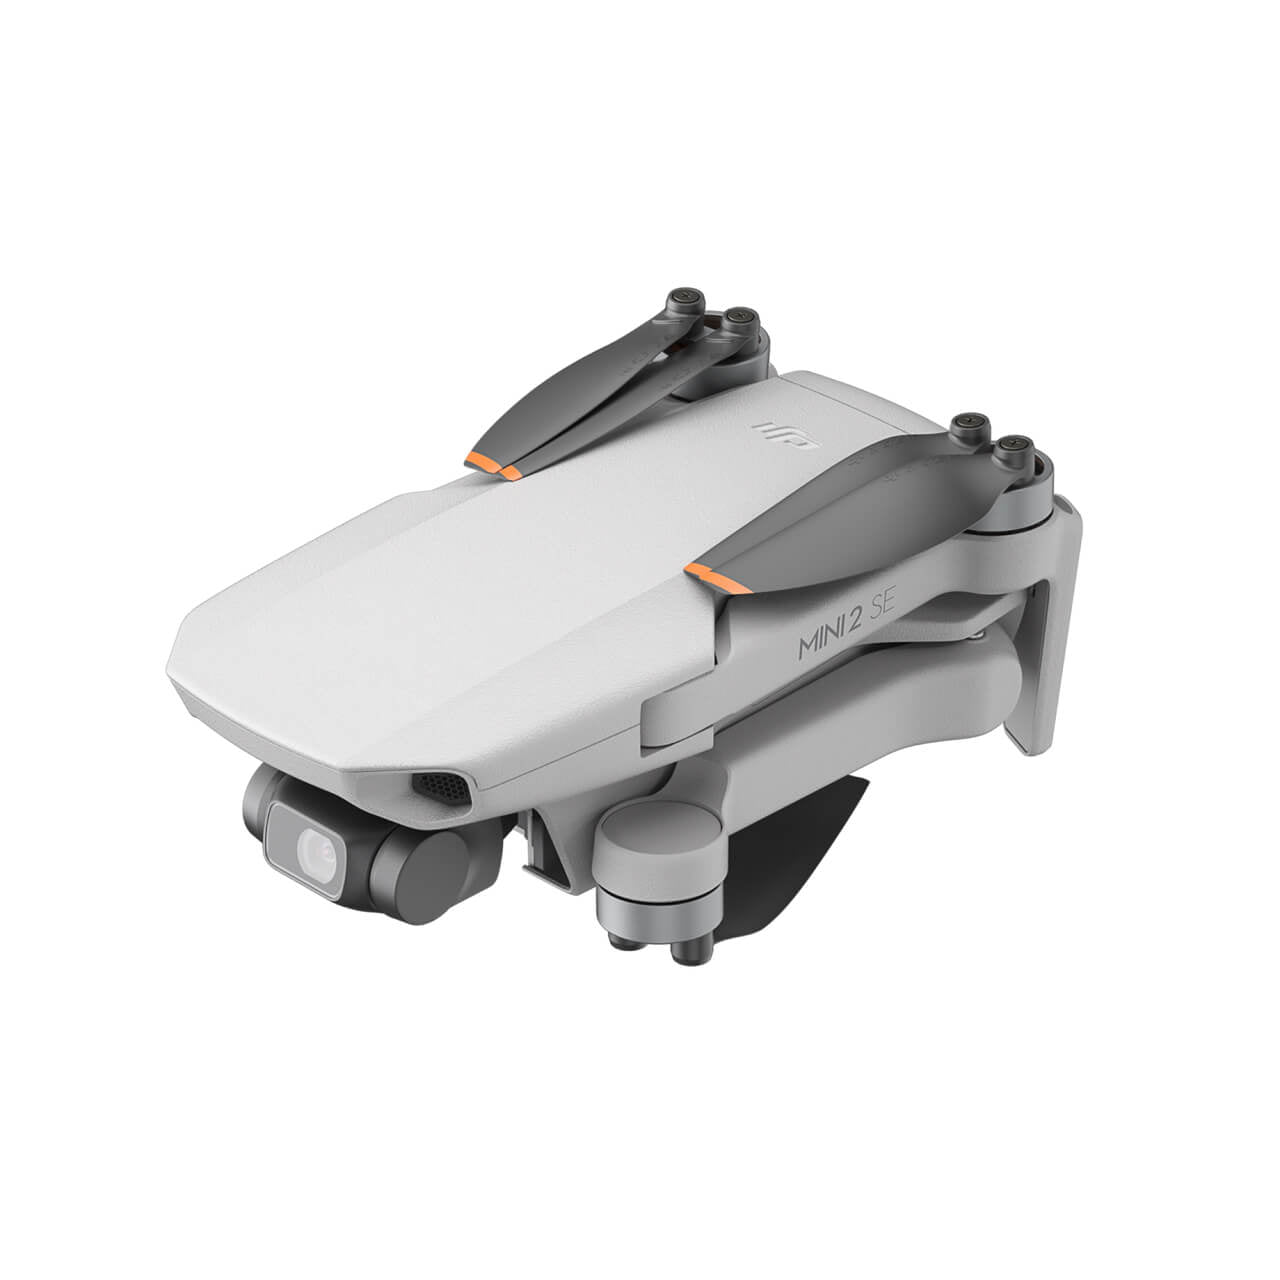 DJI Mini 2 SE - Premium Drones from DJI - Just $429! Shop now at Eagleview Drones